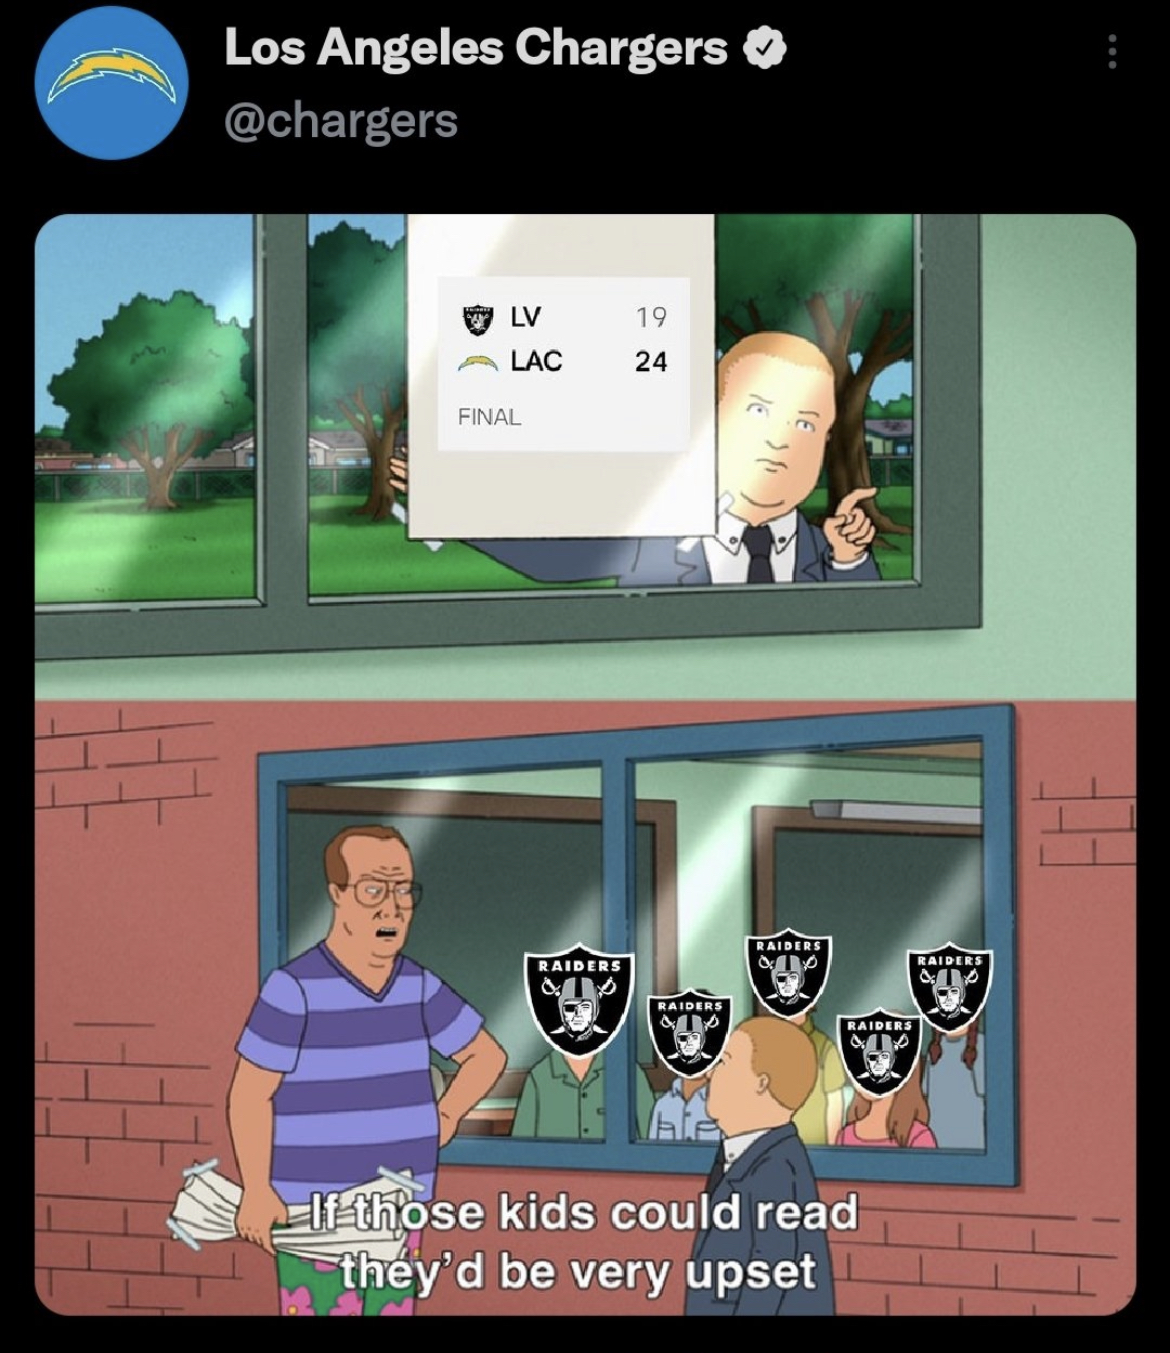 NFL memes week 1 2022 - oakland raiders - Los Angeles Chargers > Lv Lac Final Raidere 19 24 Raidere Faibert If those kids could read they'd be very upset Taidet